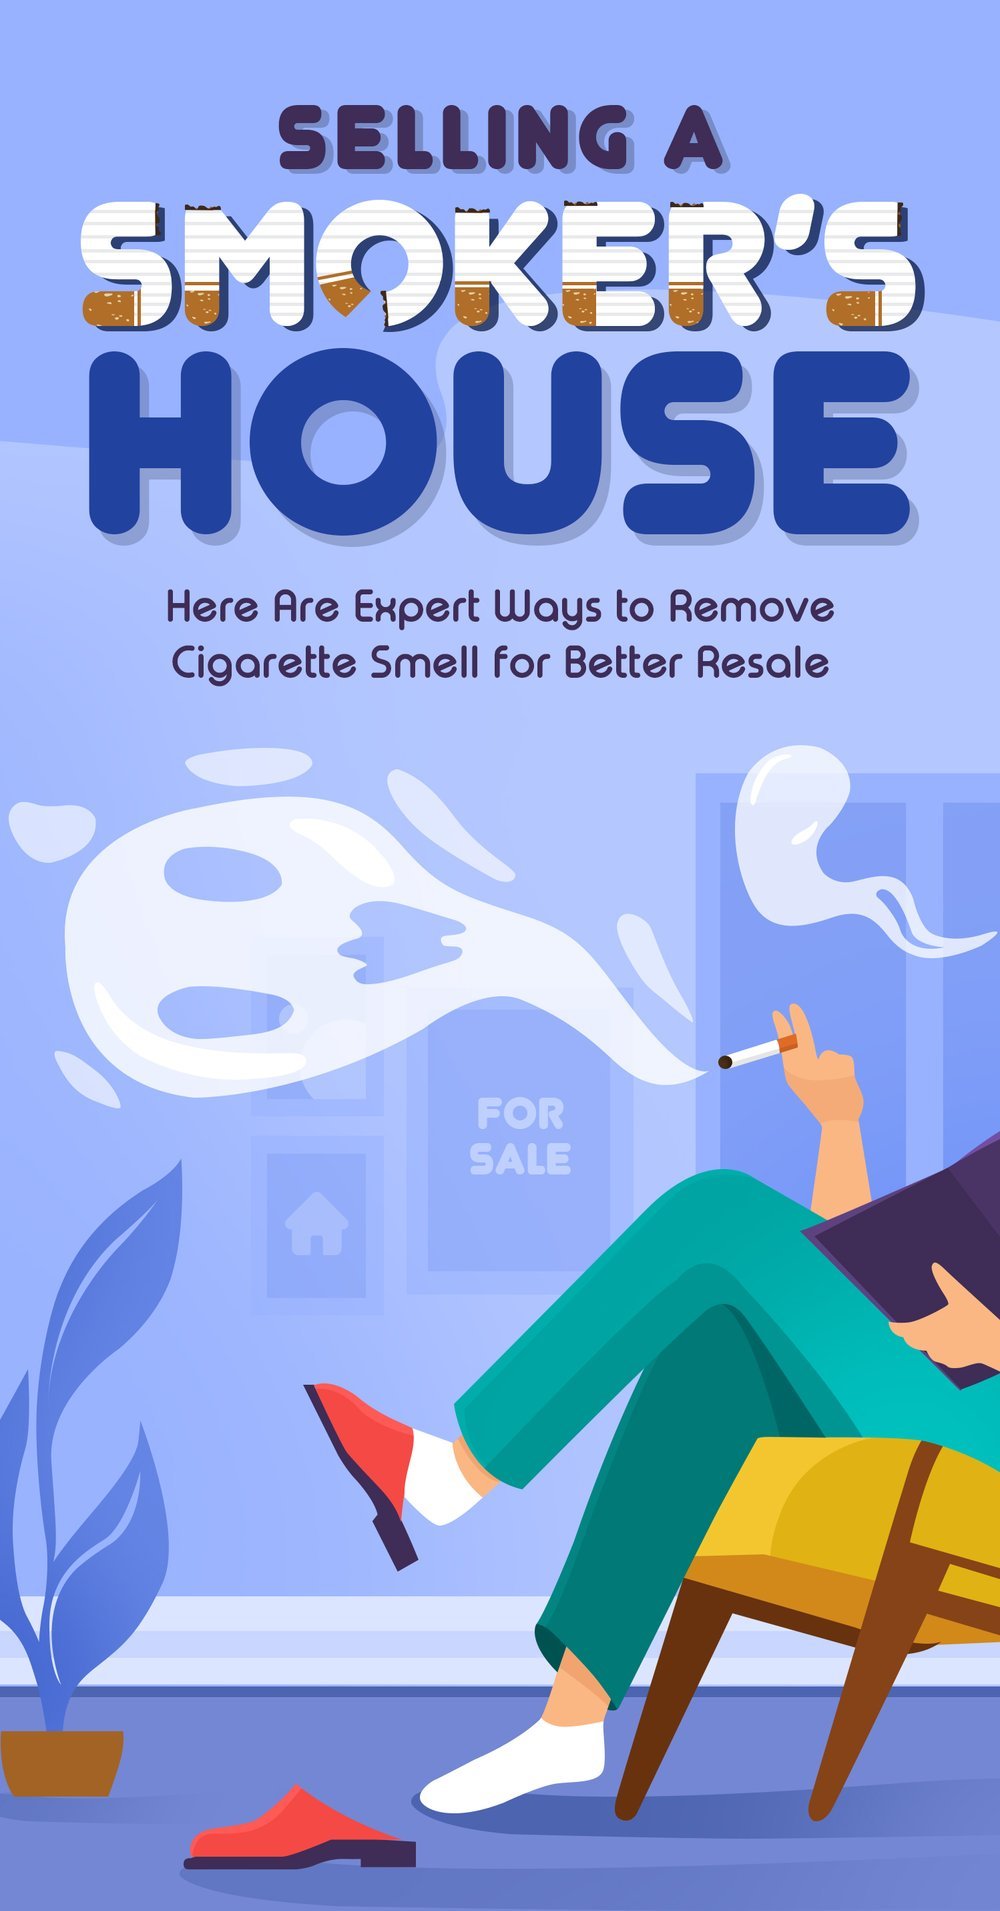 Selling A Smoker's House Here Are Expert Ways to Remove Cigarette Smell for Better Resale